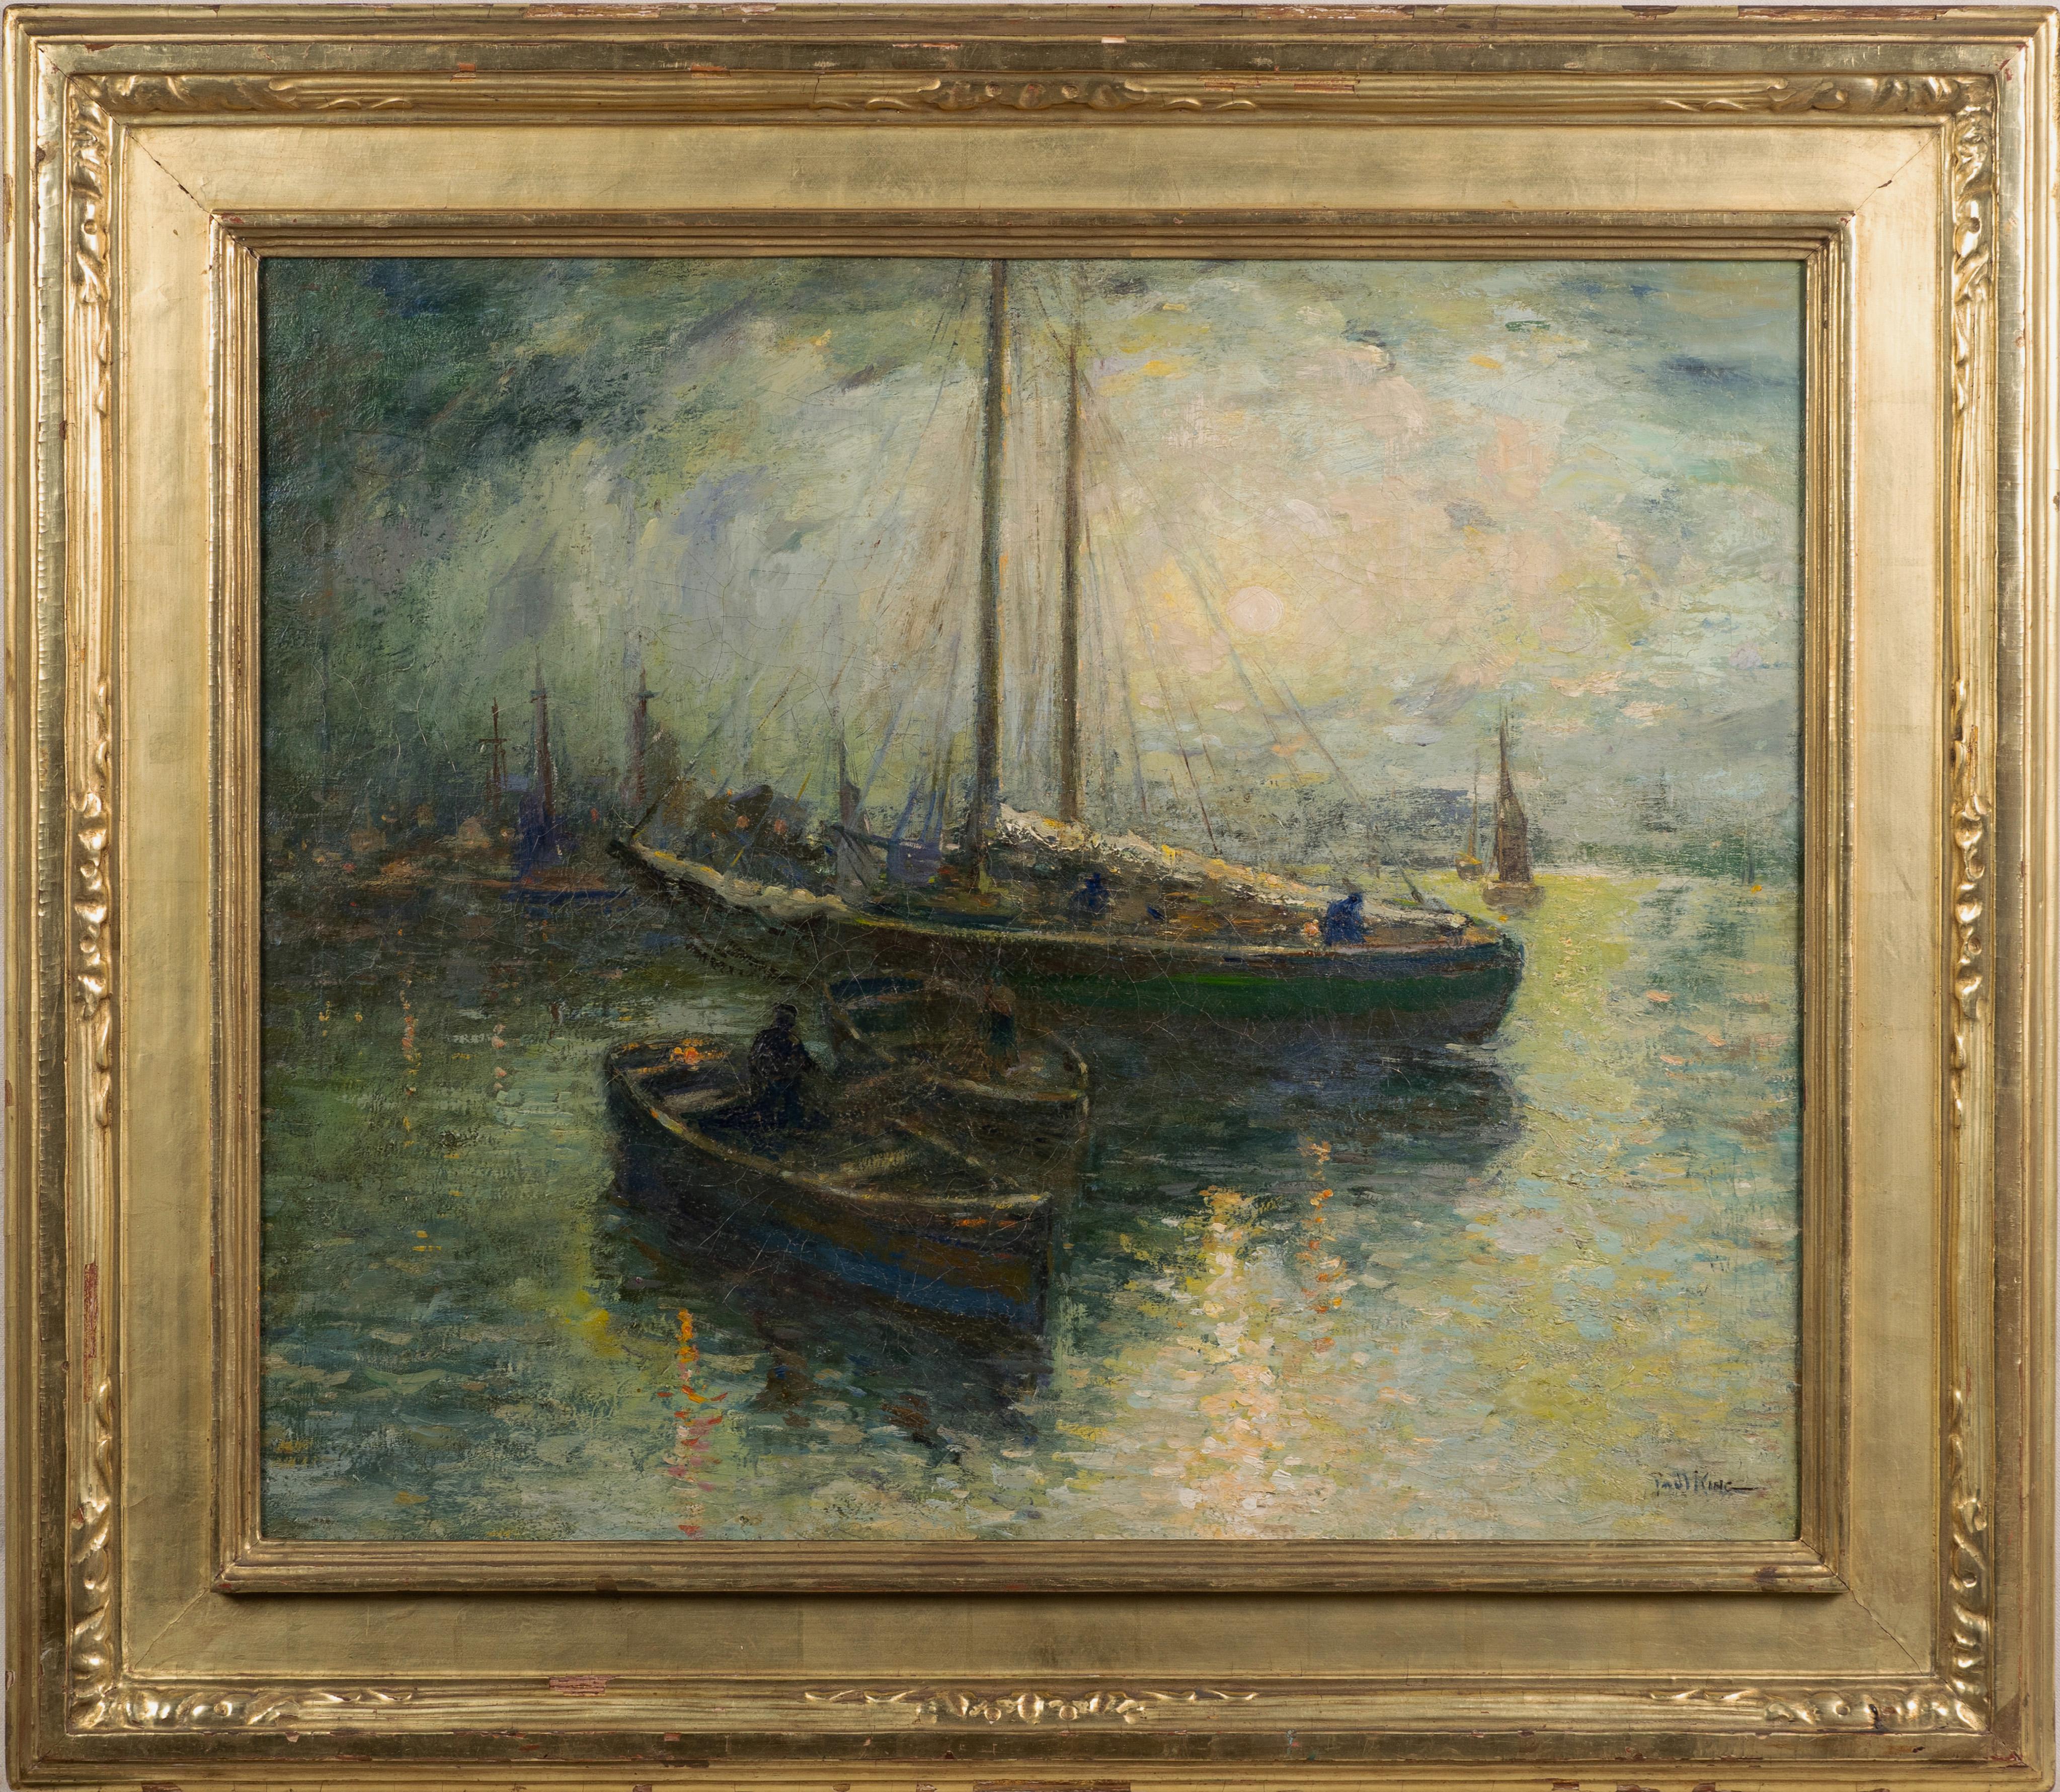 Antique American impressionist seascape oil painting by Paul Bernard King (1867 - 1947).  Oil on canvas.  Signed.  Framed.  